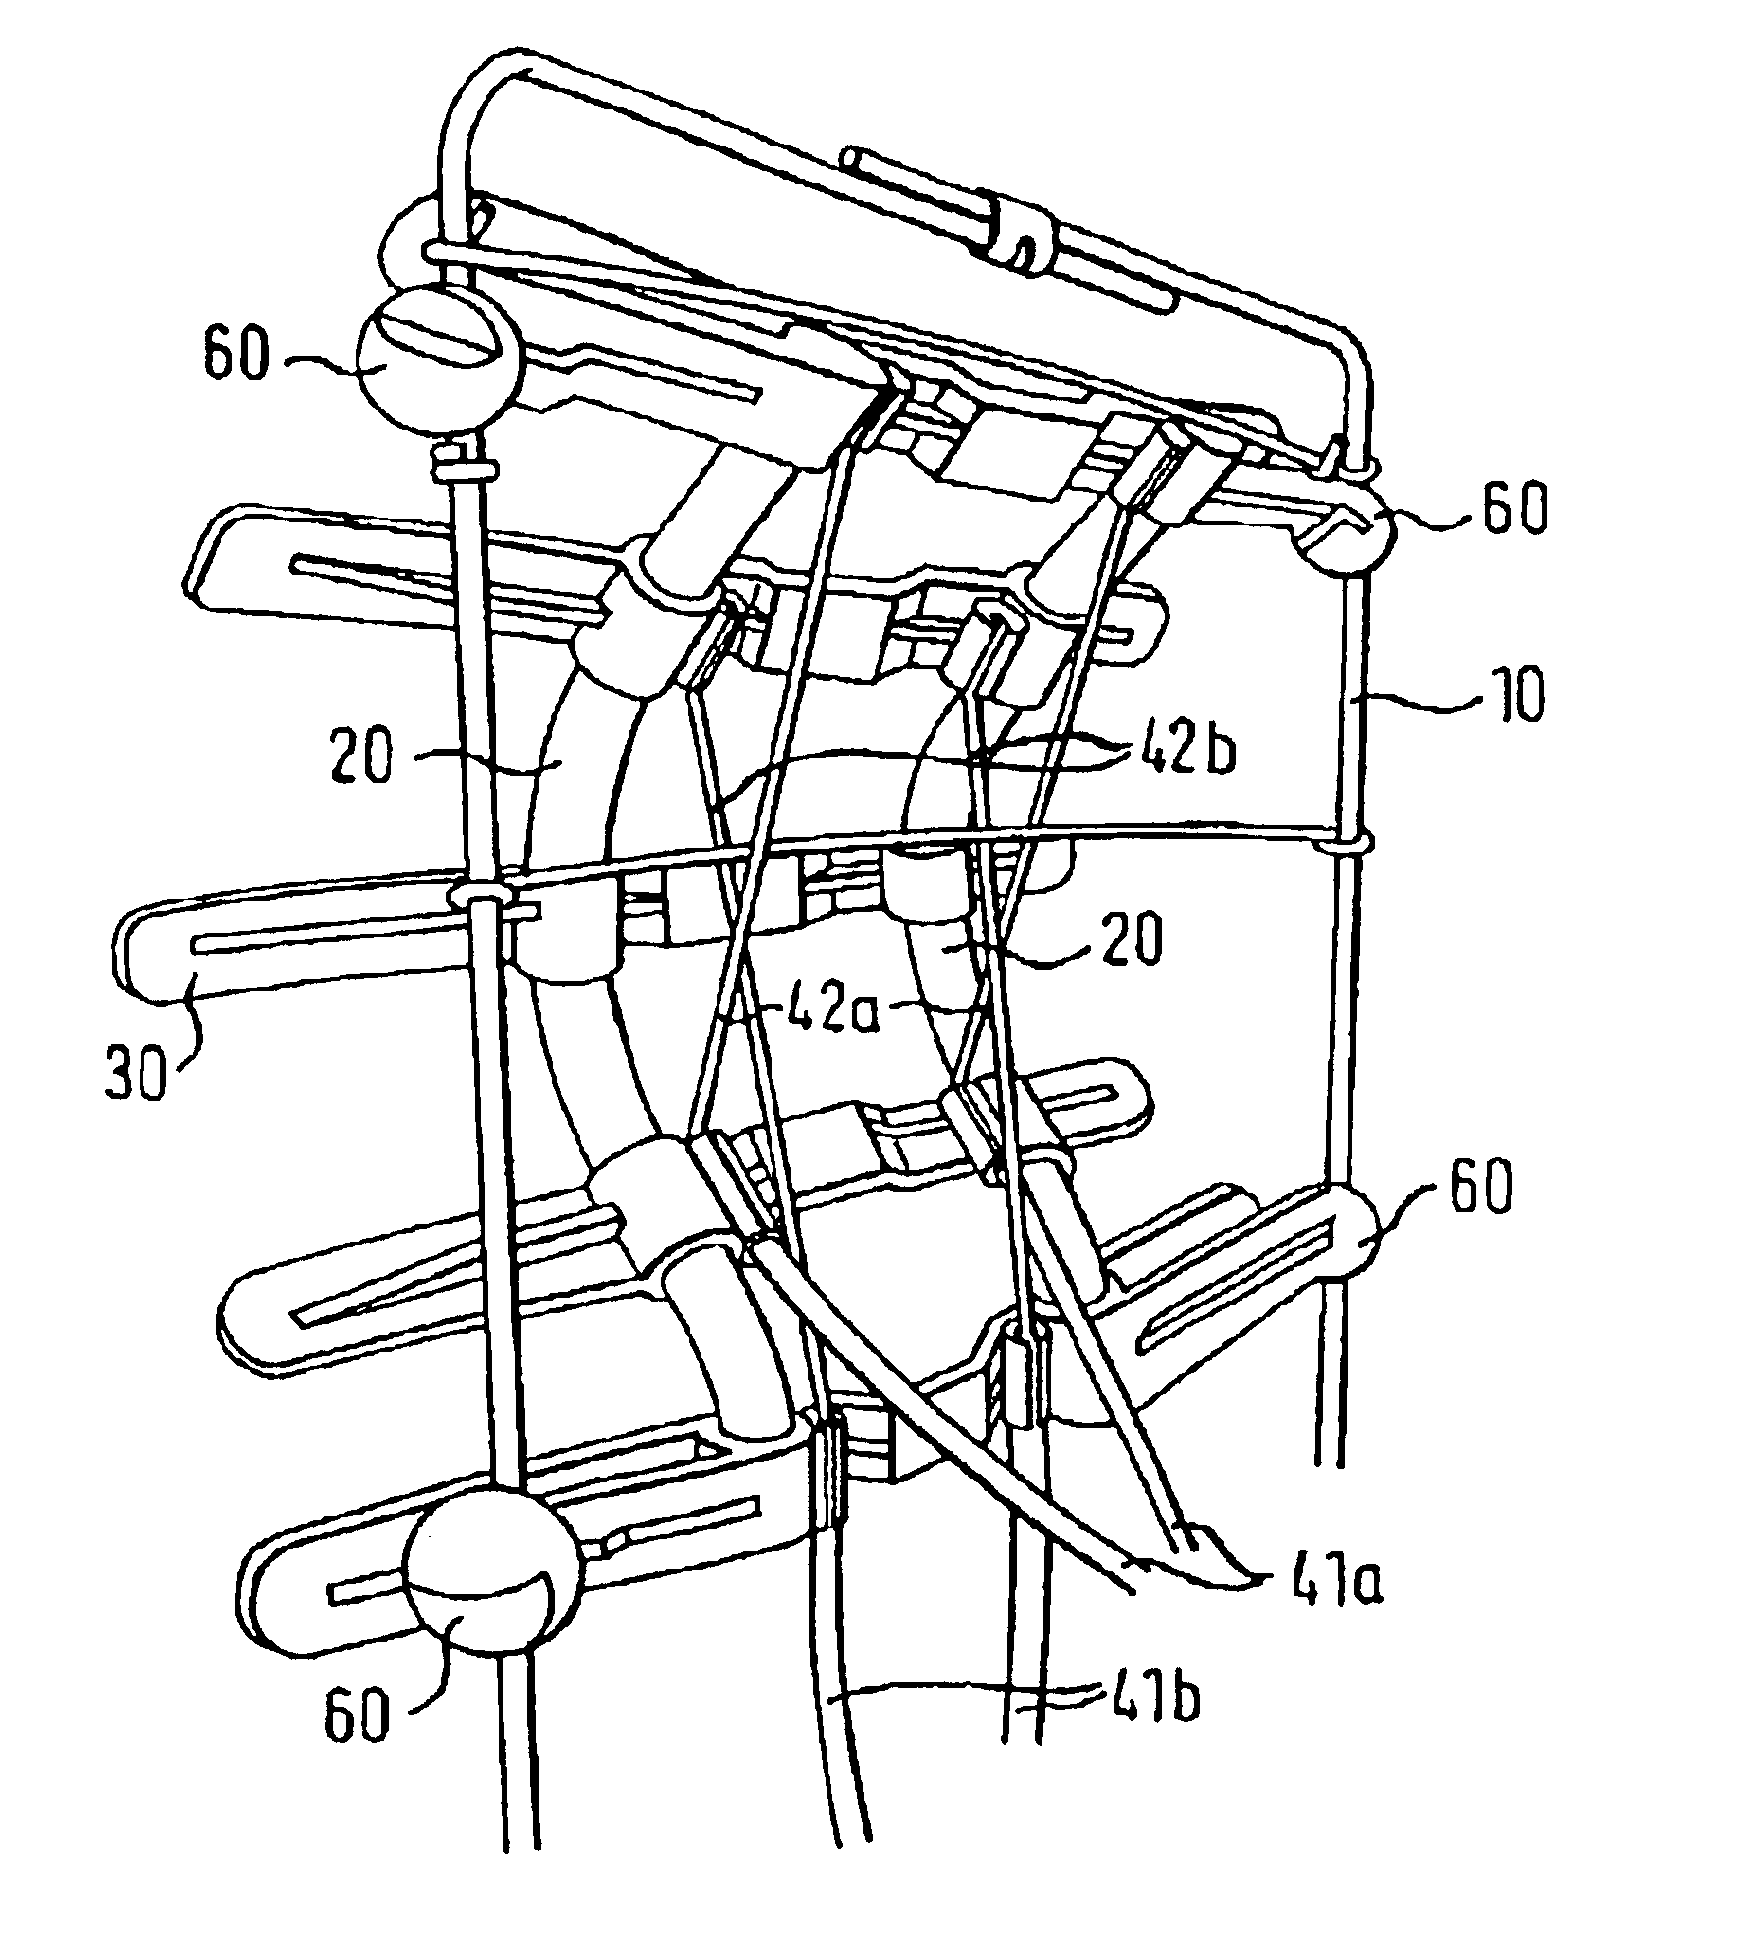 Spine support for vehicle seats